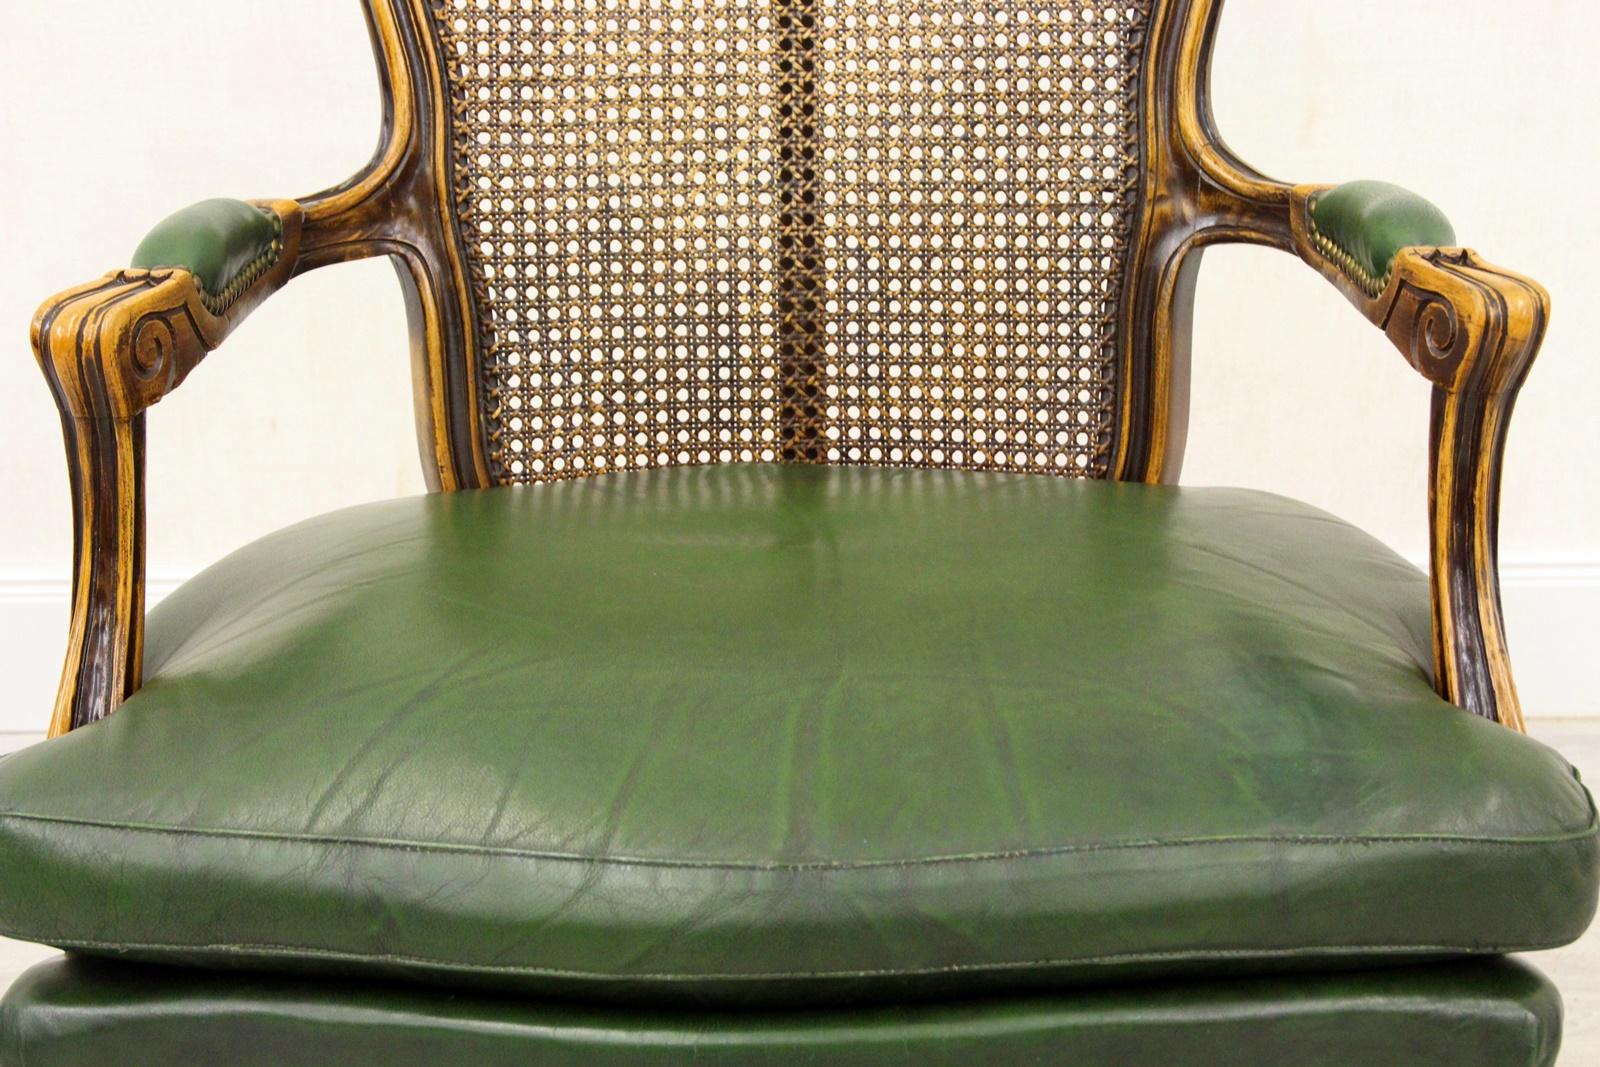 Chippendale leather chair.
Press hard !!!
Measures: Chair
Height x 96cm, width x 70cm, depth x 75cm
Condition: The armchair is in good condition for the age and still has the charm of the 